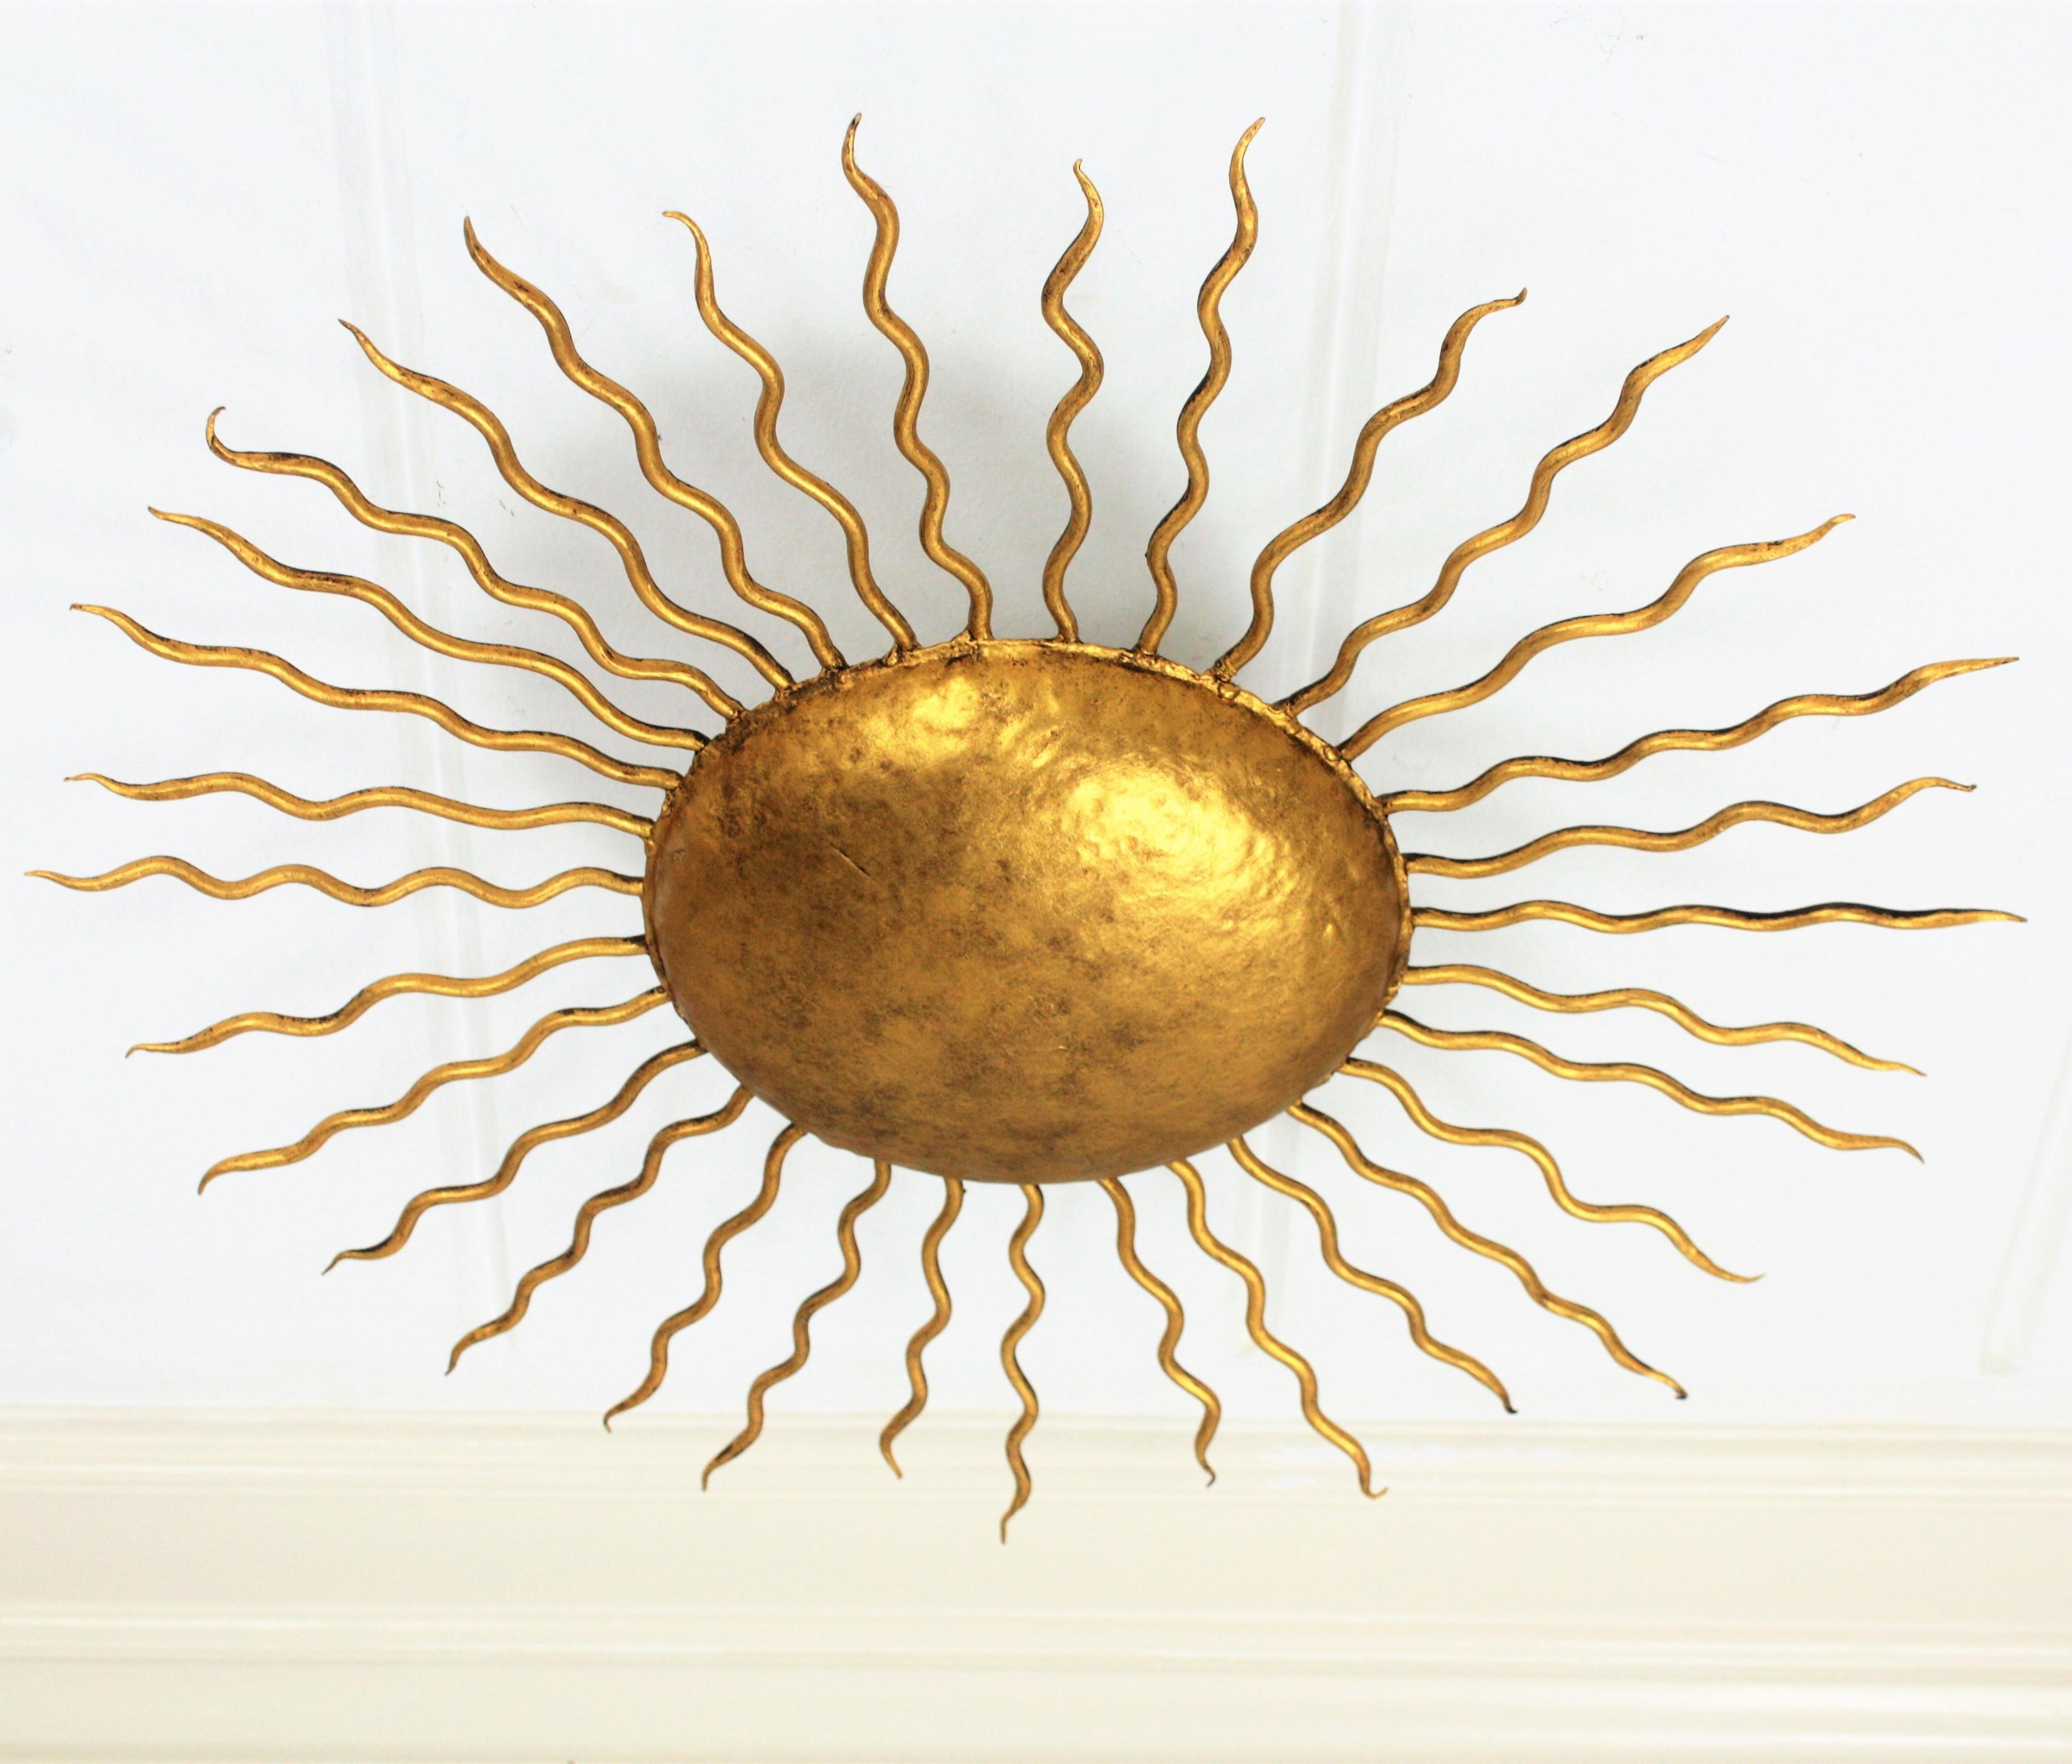 Beautiful hand-hammered gilt iron sunburst light fixture with Brutalist accents. Richly decorated with hand-hammered marks. It has curly iron rays in two sizes surrounding the central sphere. It can be placed as ceiling light fixture but also as a